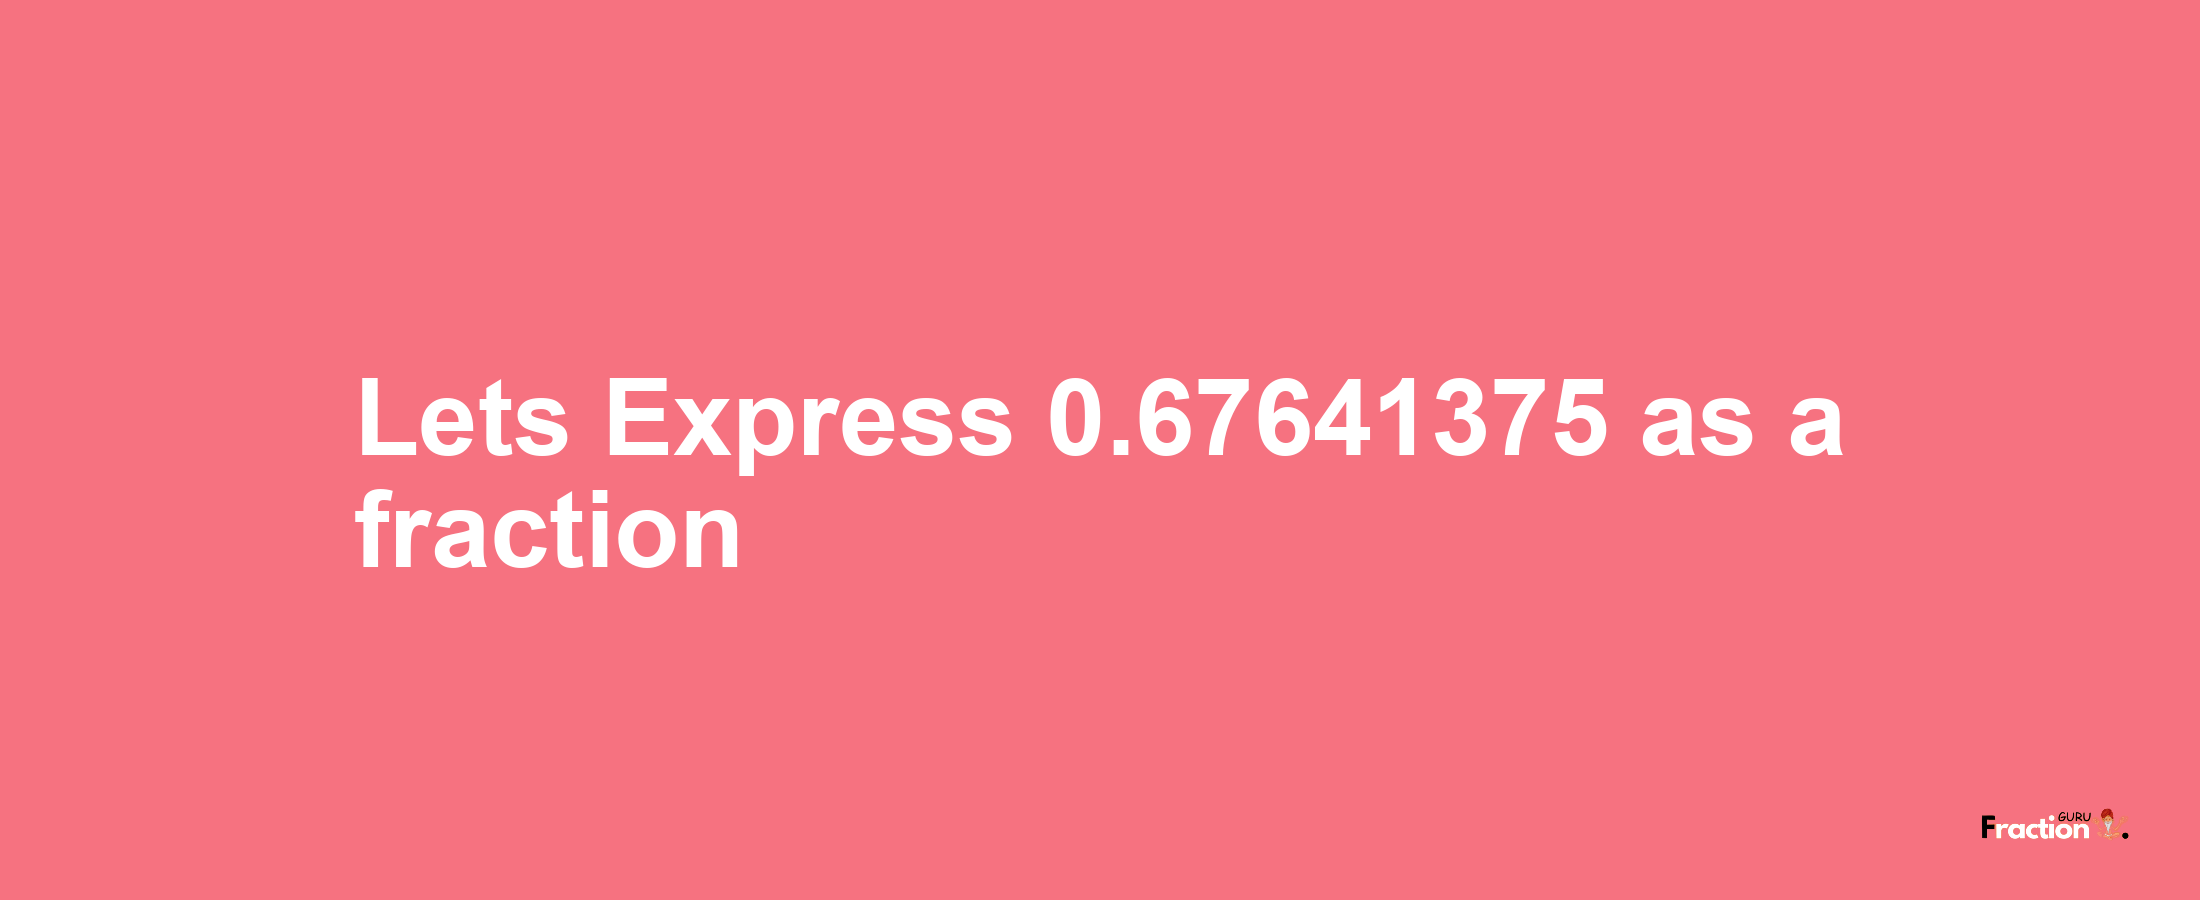 Lets Express 0.67641375 as afraction